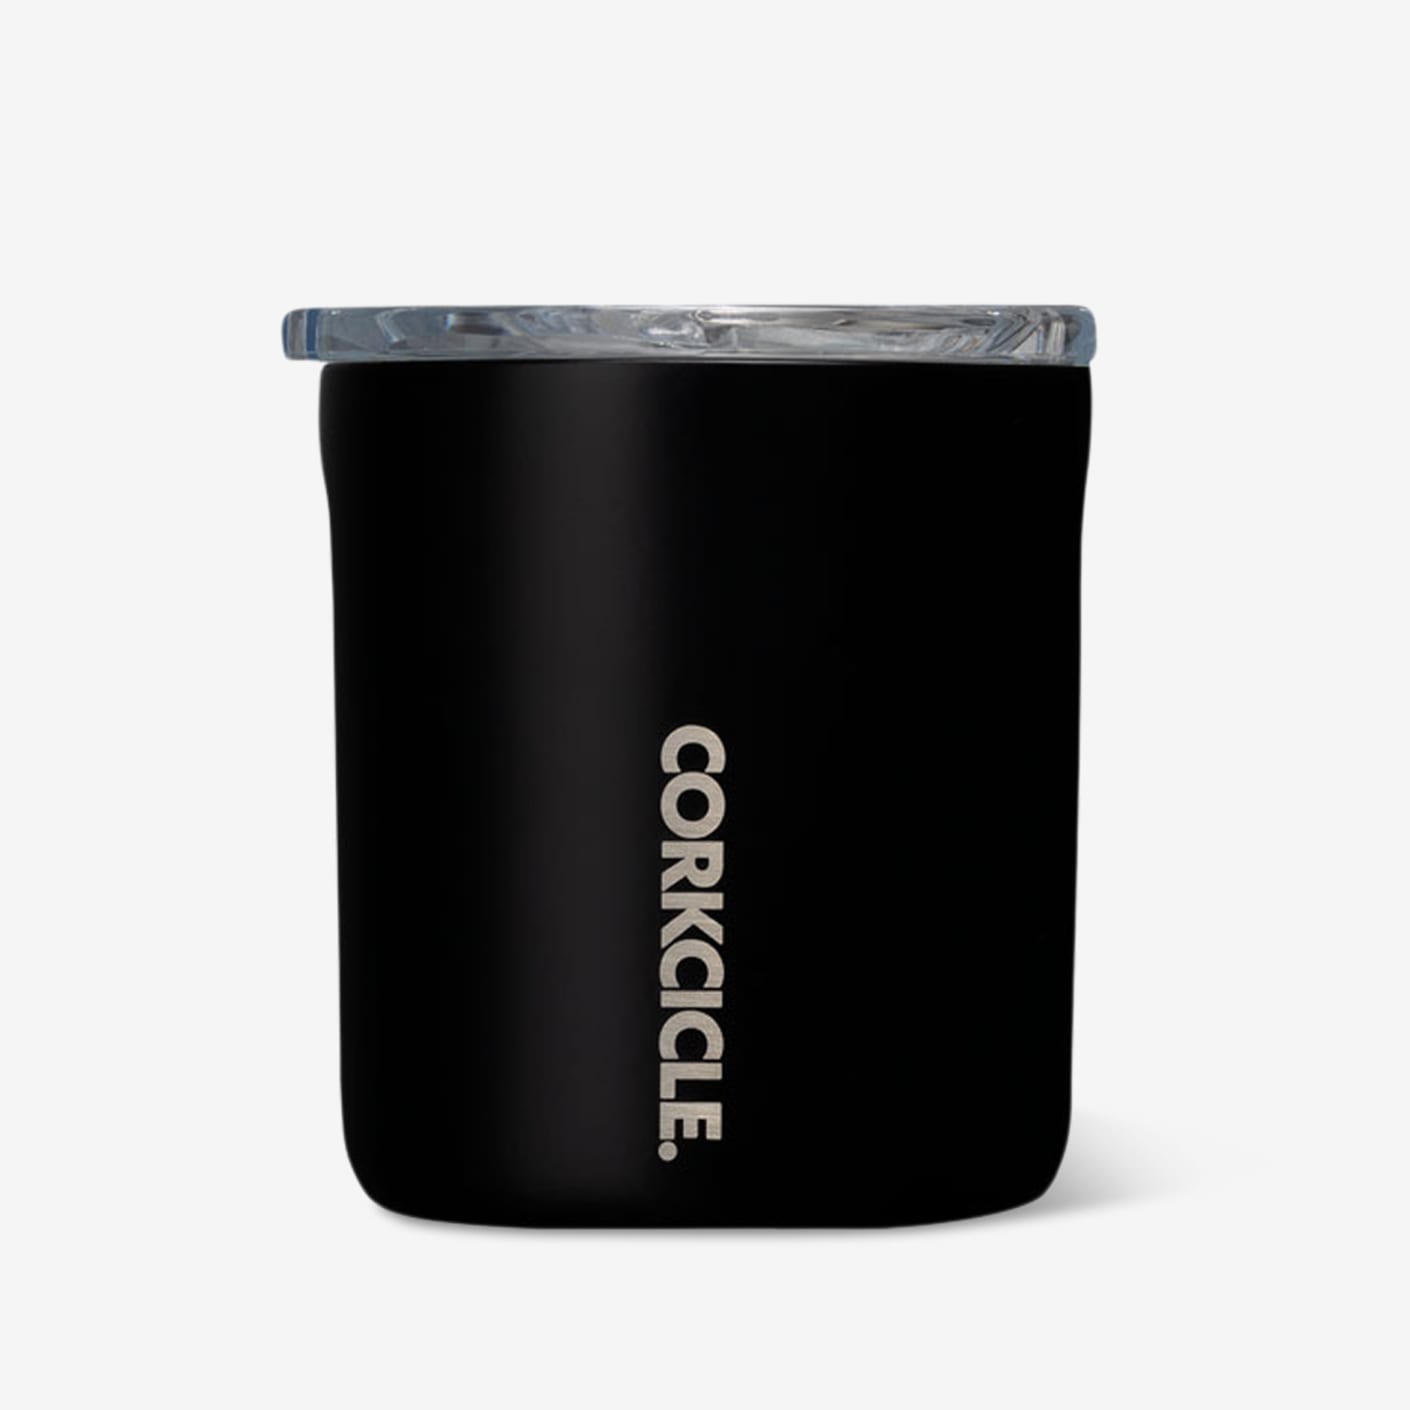 https://dam.bespokepost.com/image/upload/c_fill,dpr_auto,f_auto,h_1410,q_auto,w_1410/v1/freelance/finals/corkcicle/corkcicle-buzz-insulated-cocktail-tumbler10